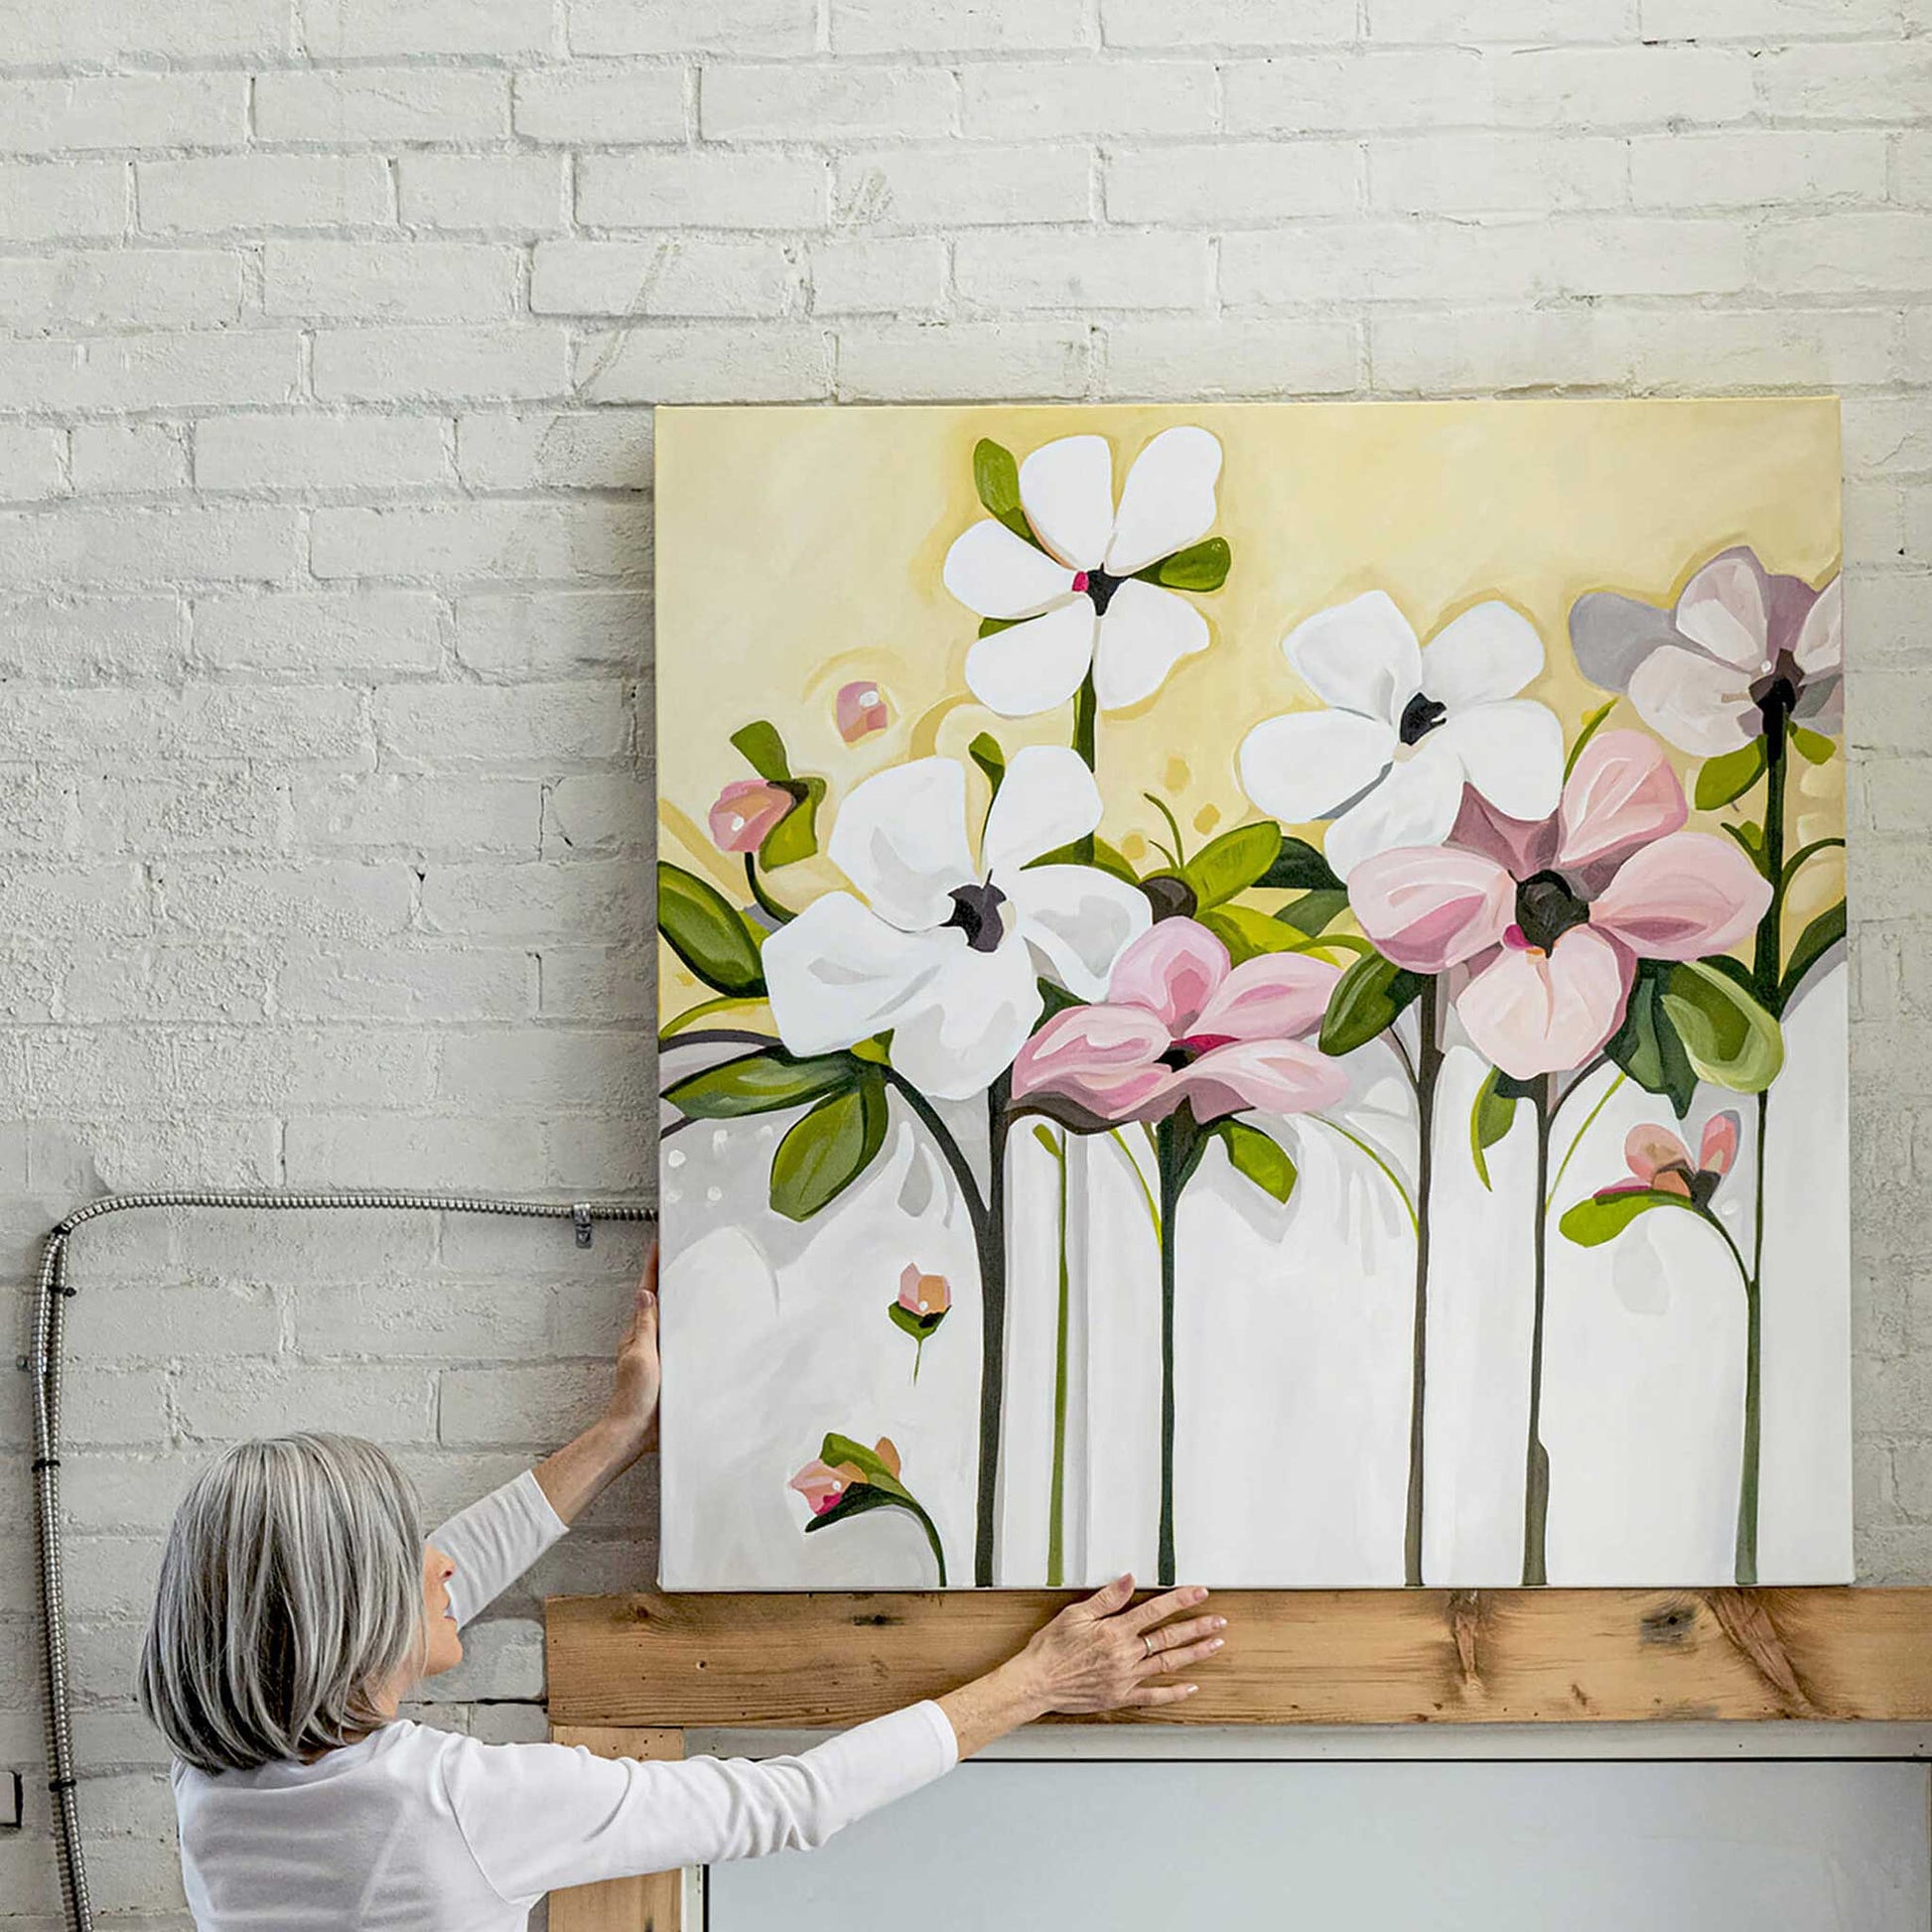 acrylic flower painting large contemporary floral painting on canvas